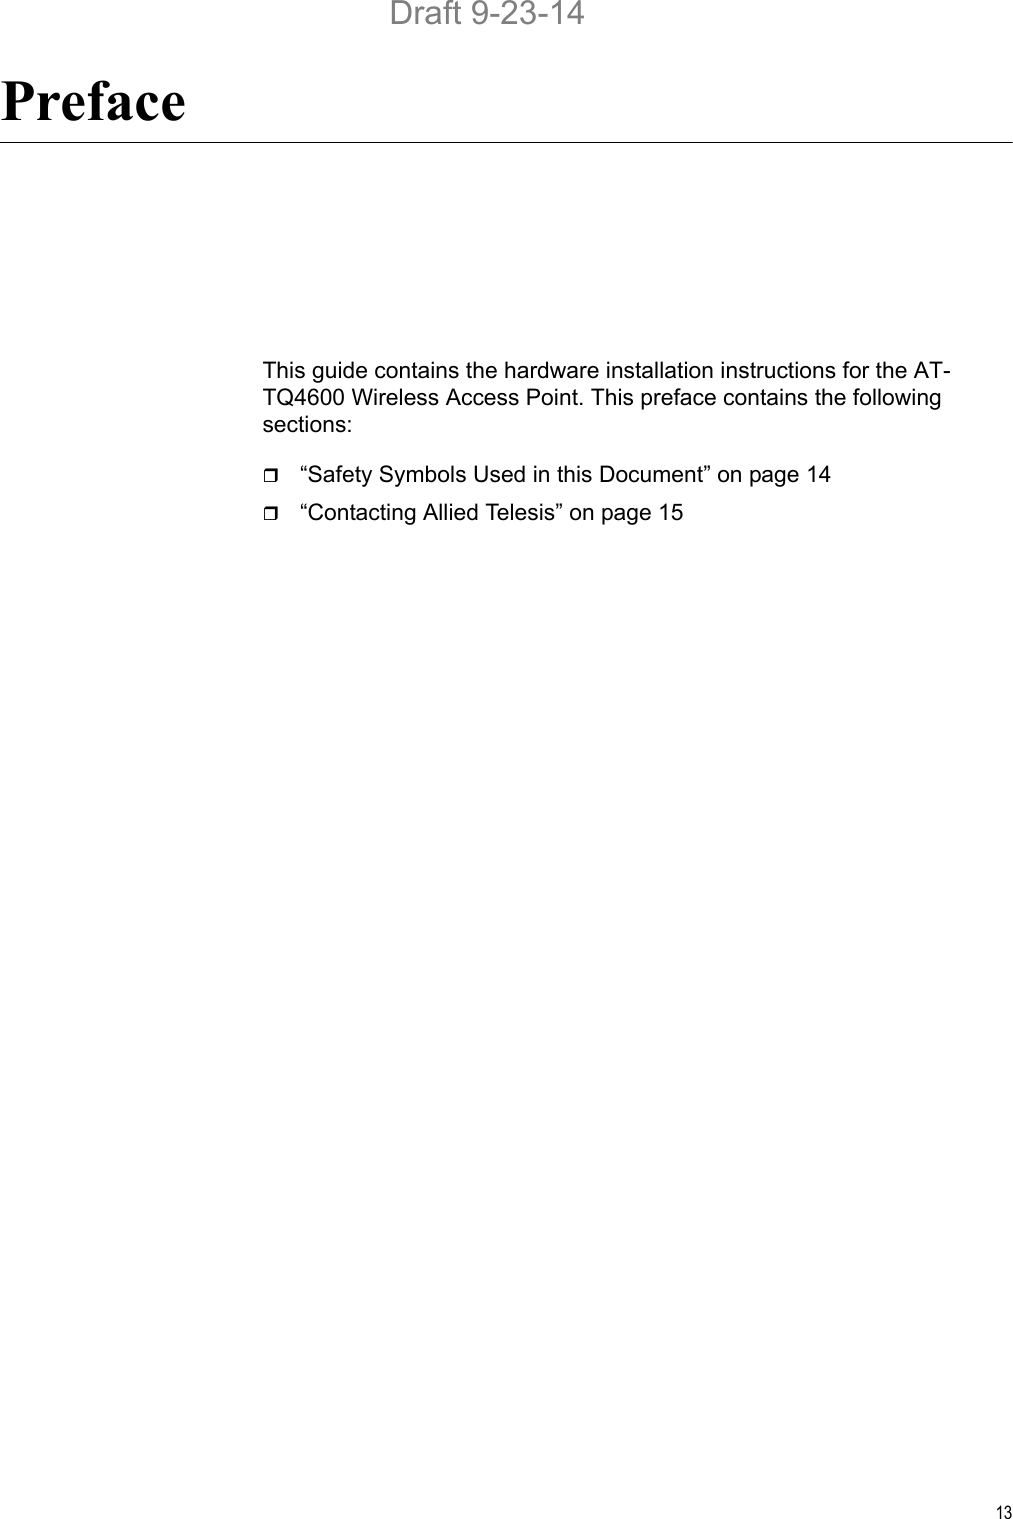 13PrefaceThis guide contains the hardware installation instructions for the AT-TQ4600 Wireless Access Point. This preface contains the following sections:“Safety Symbols Used in this Document” on page 14“Contacting Allied Telesis” on page 15Draft 9-23-14